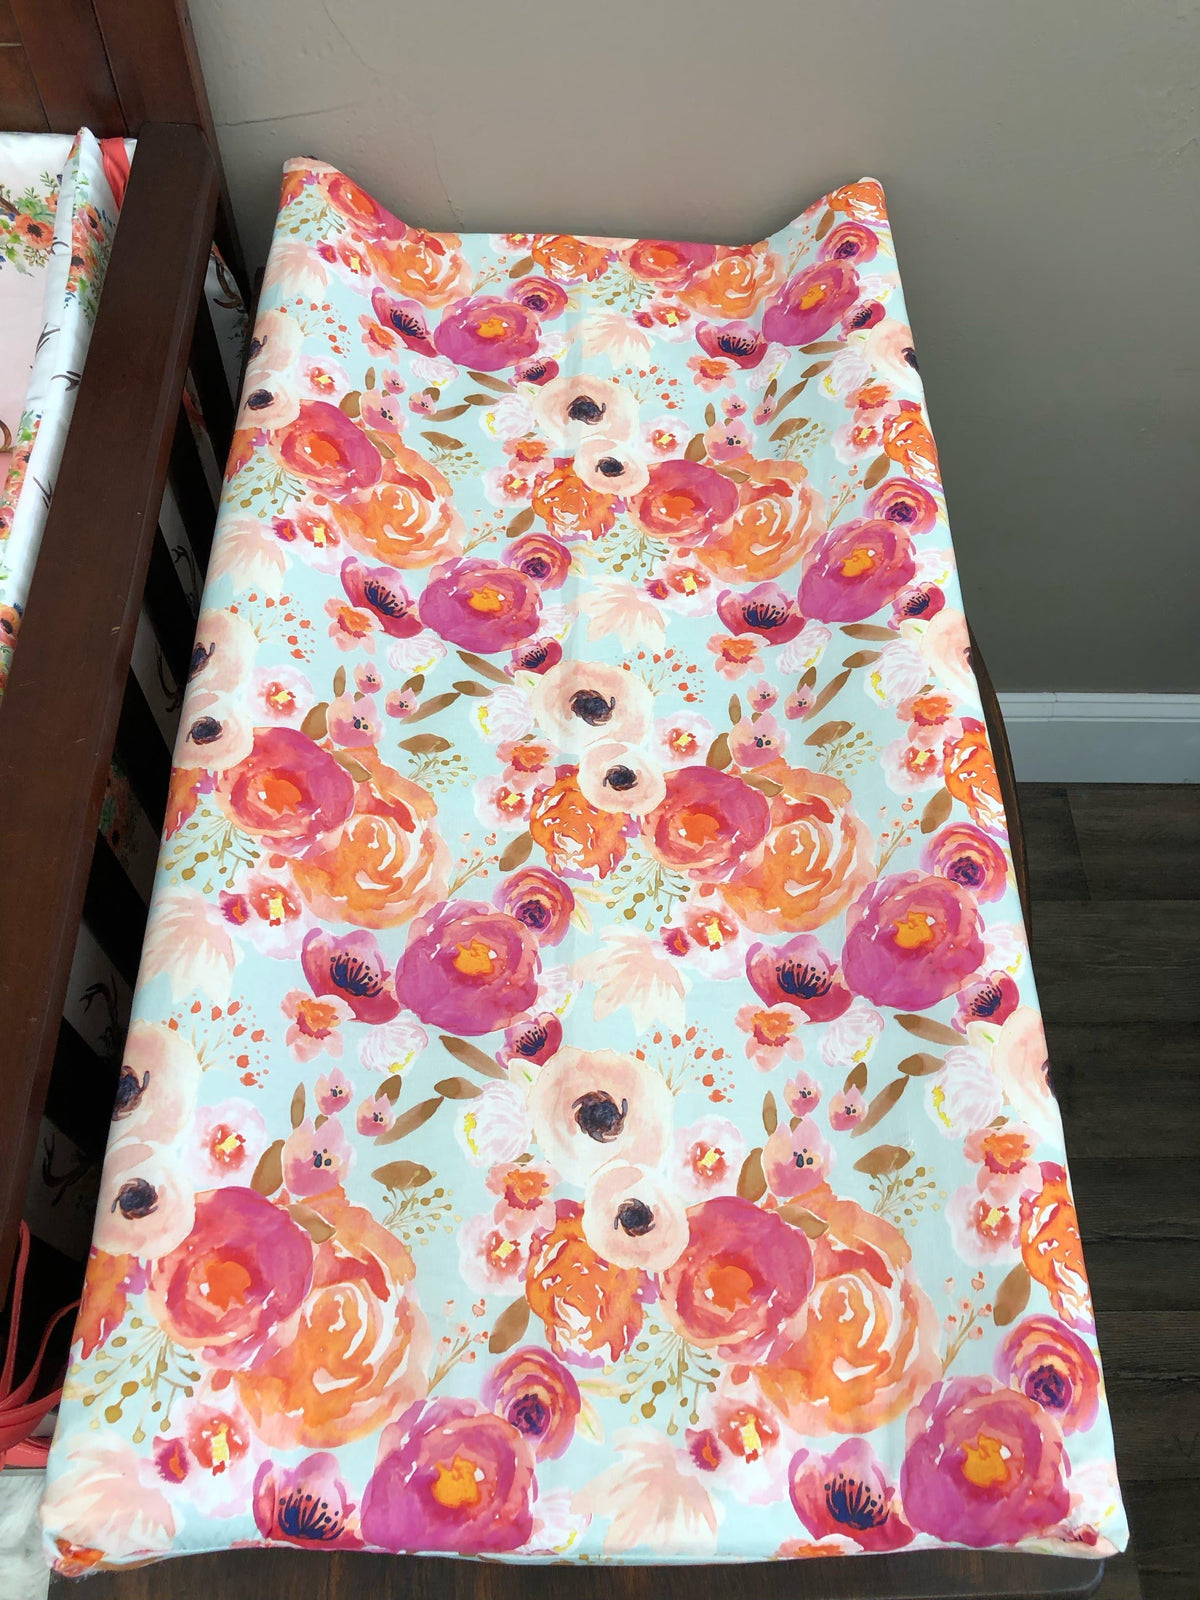 Changing Pad Cover - Floral in Watercolor Flowers - DBC Baby Bedding Co 